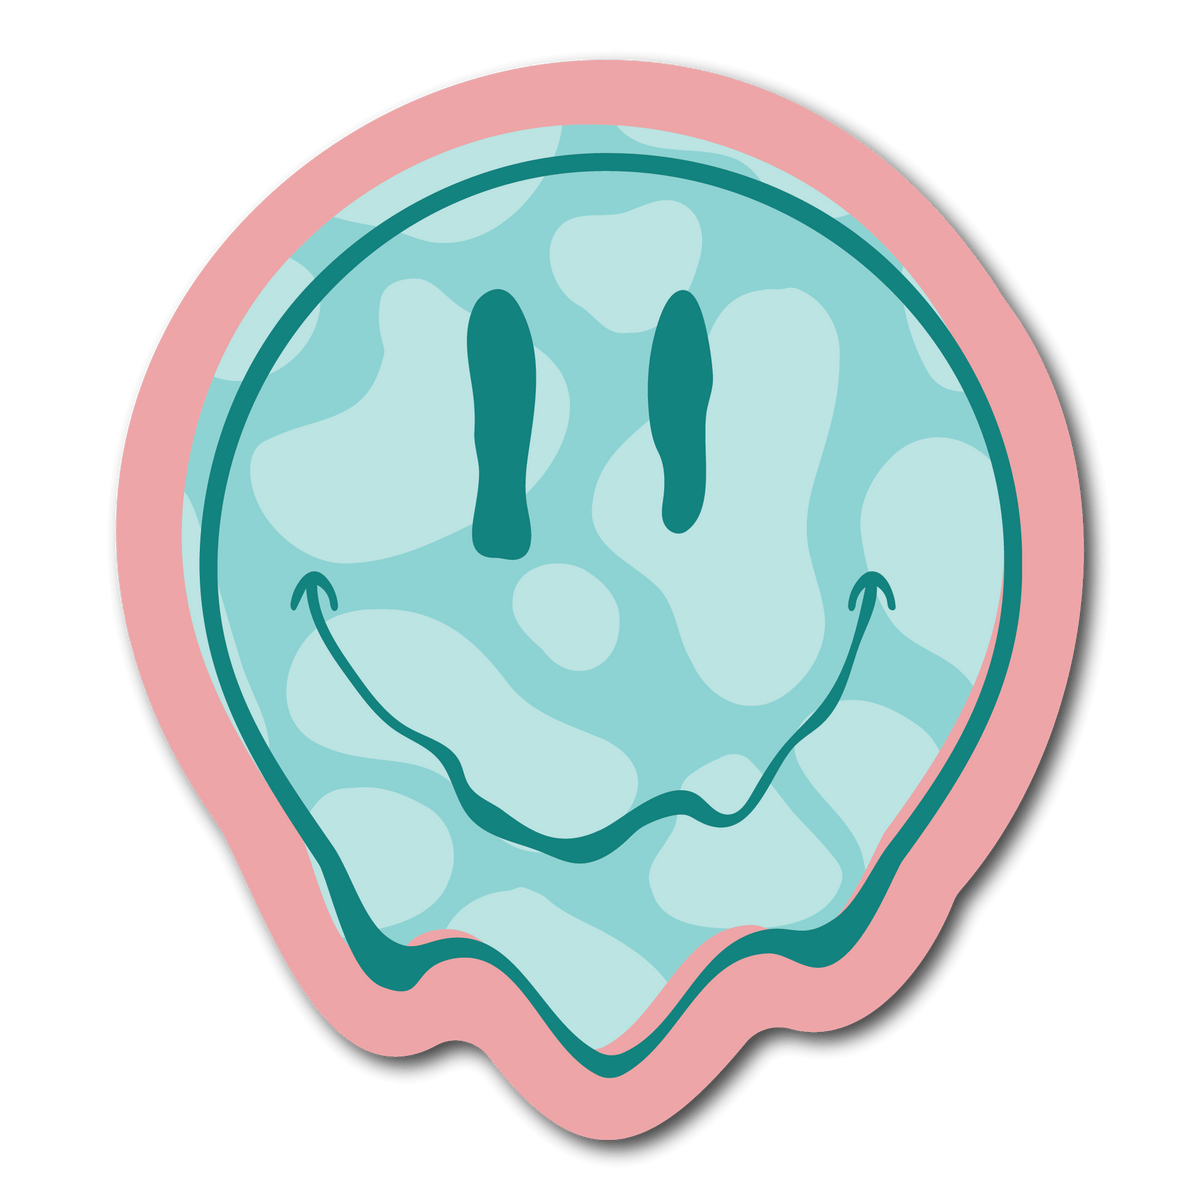 Small Sticker of a Blue Smiley Face with a cow print background